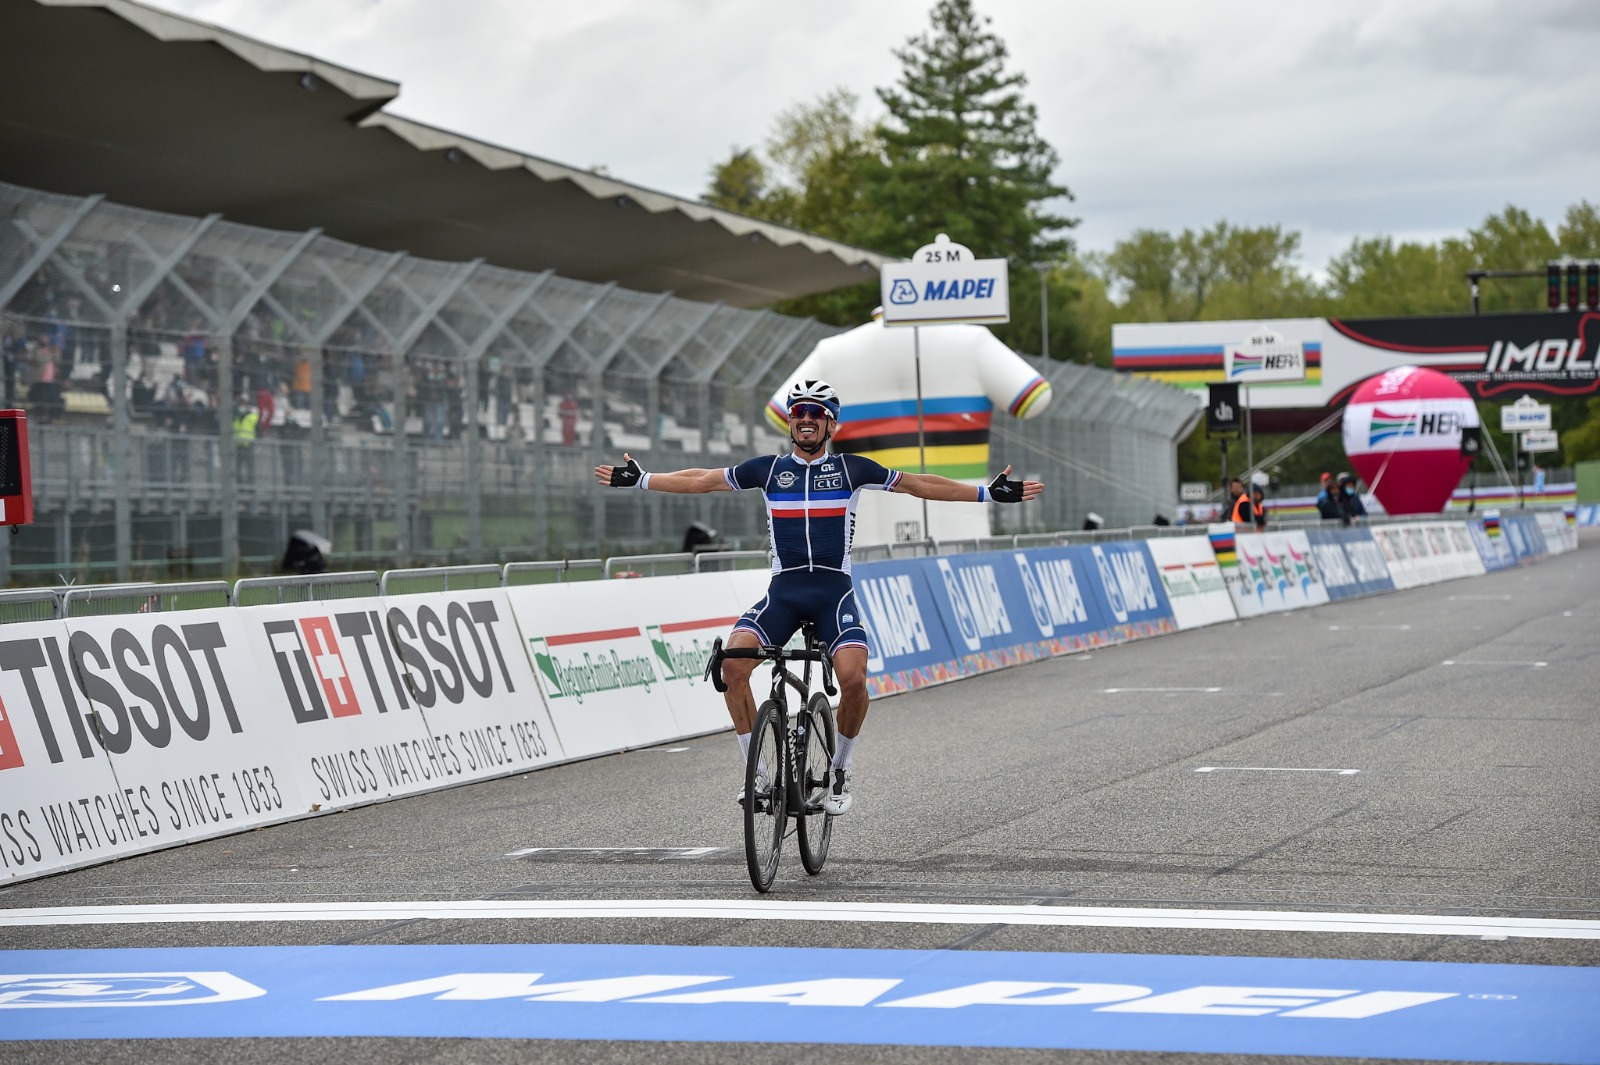 To Julian Alaphilippe The Men Elite Road Race Rainbow Jersey At The 2020 Uci World Championships In Imola Emilia Romagna Imola Er2020